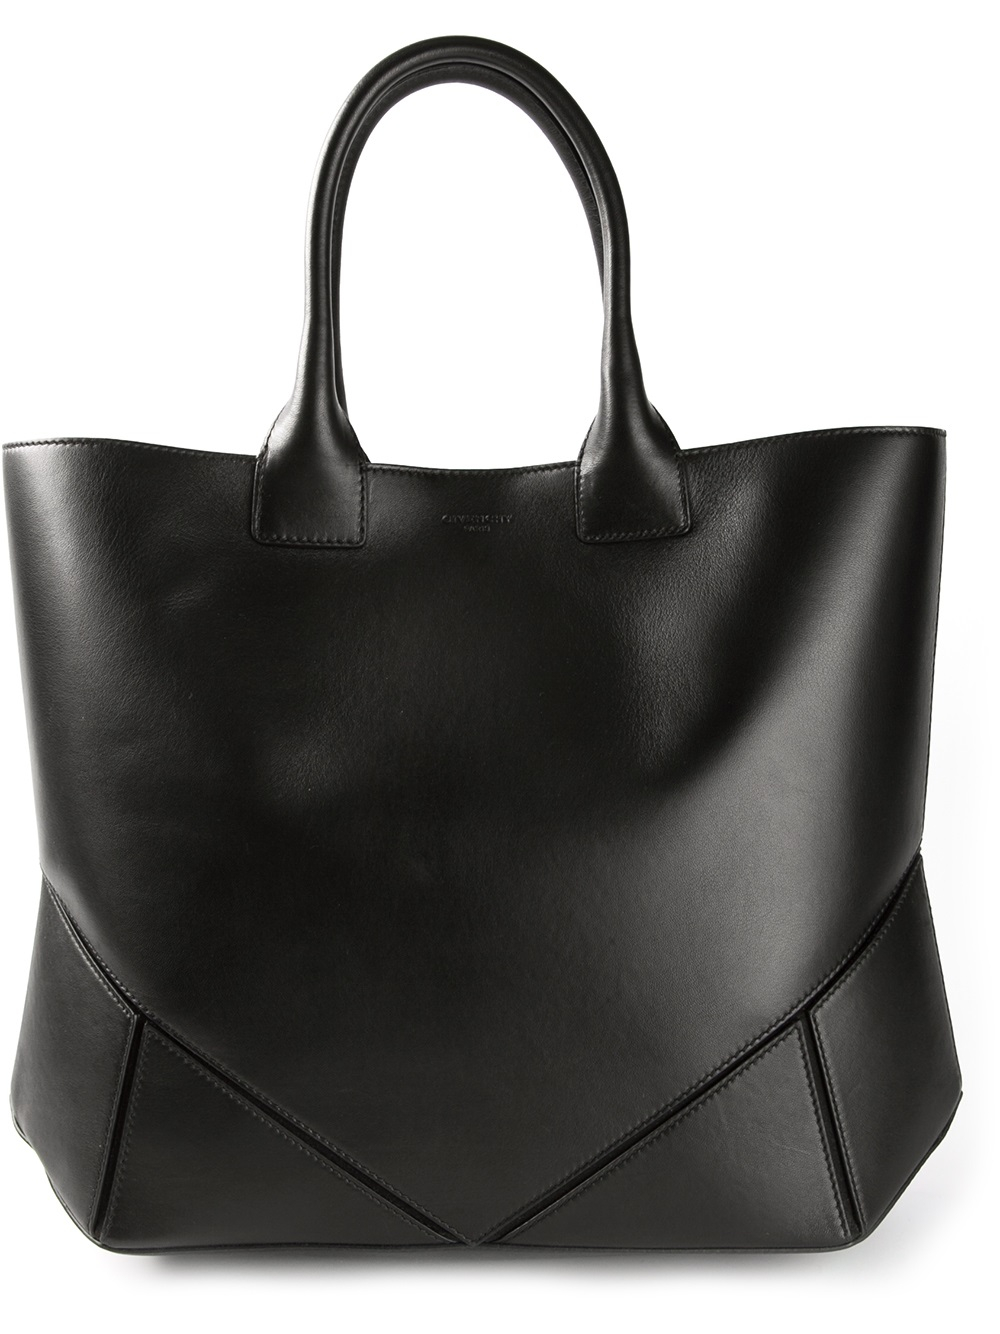 Lyst - Givenchy Easy Tote in Black